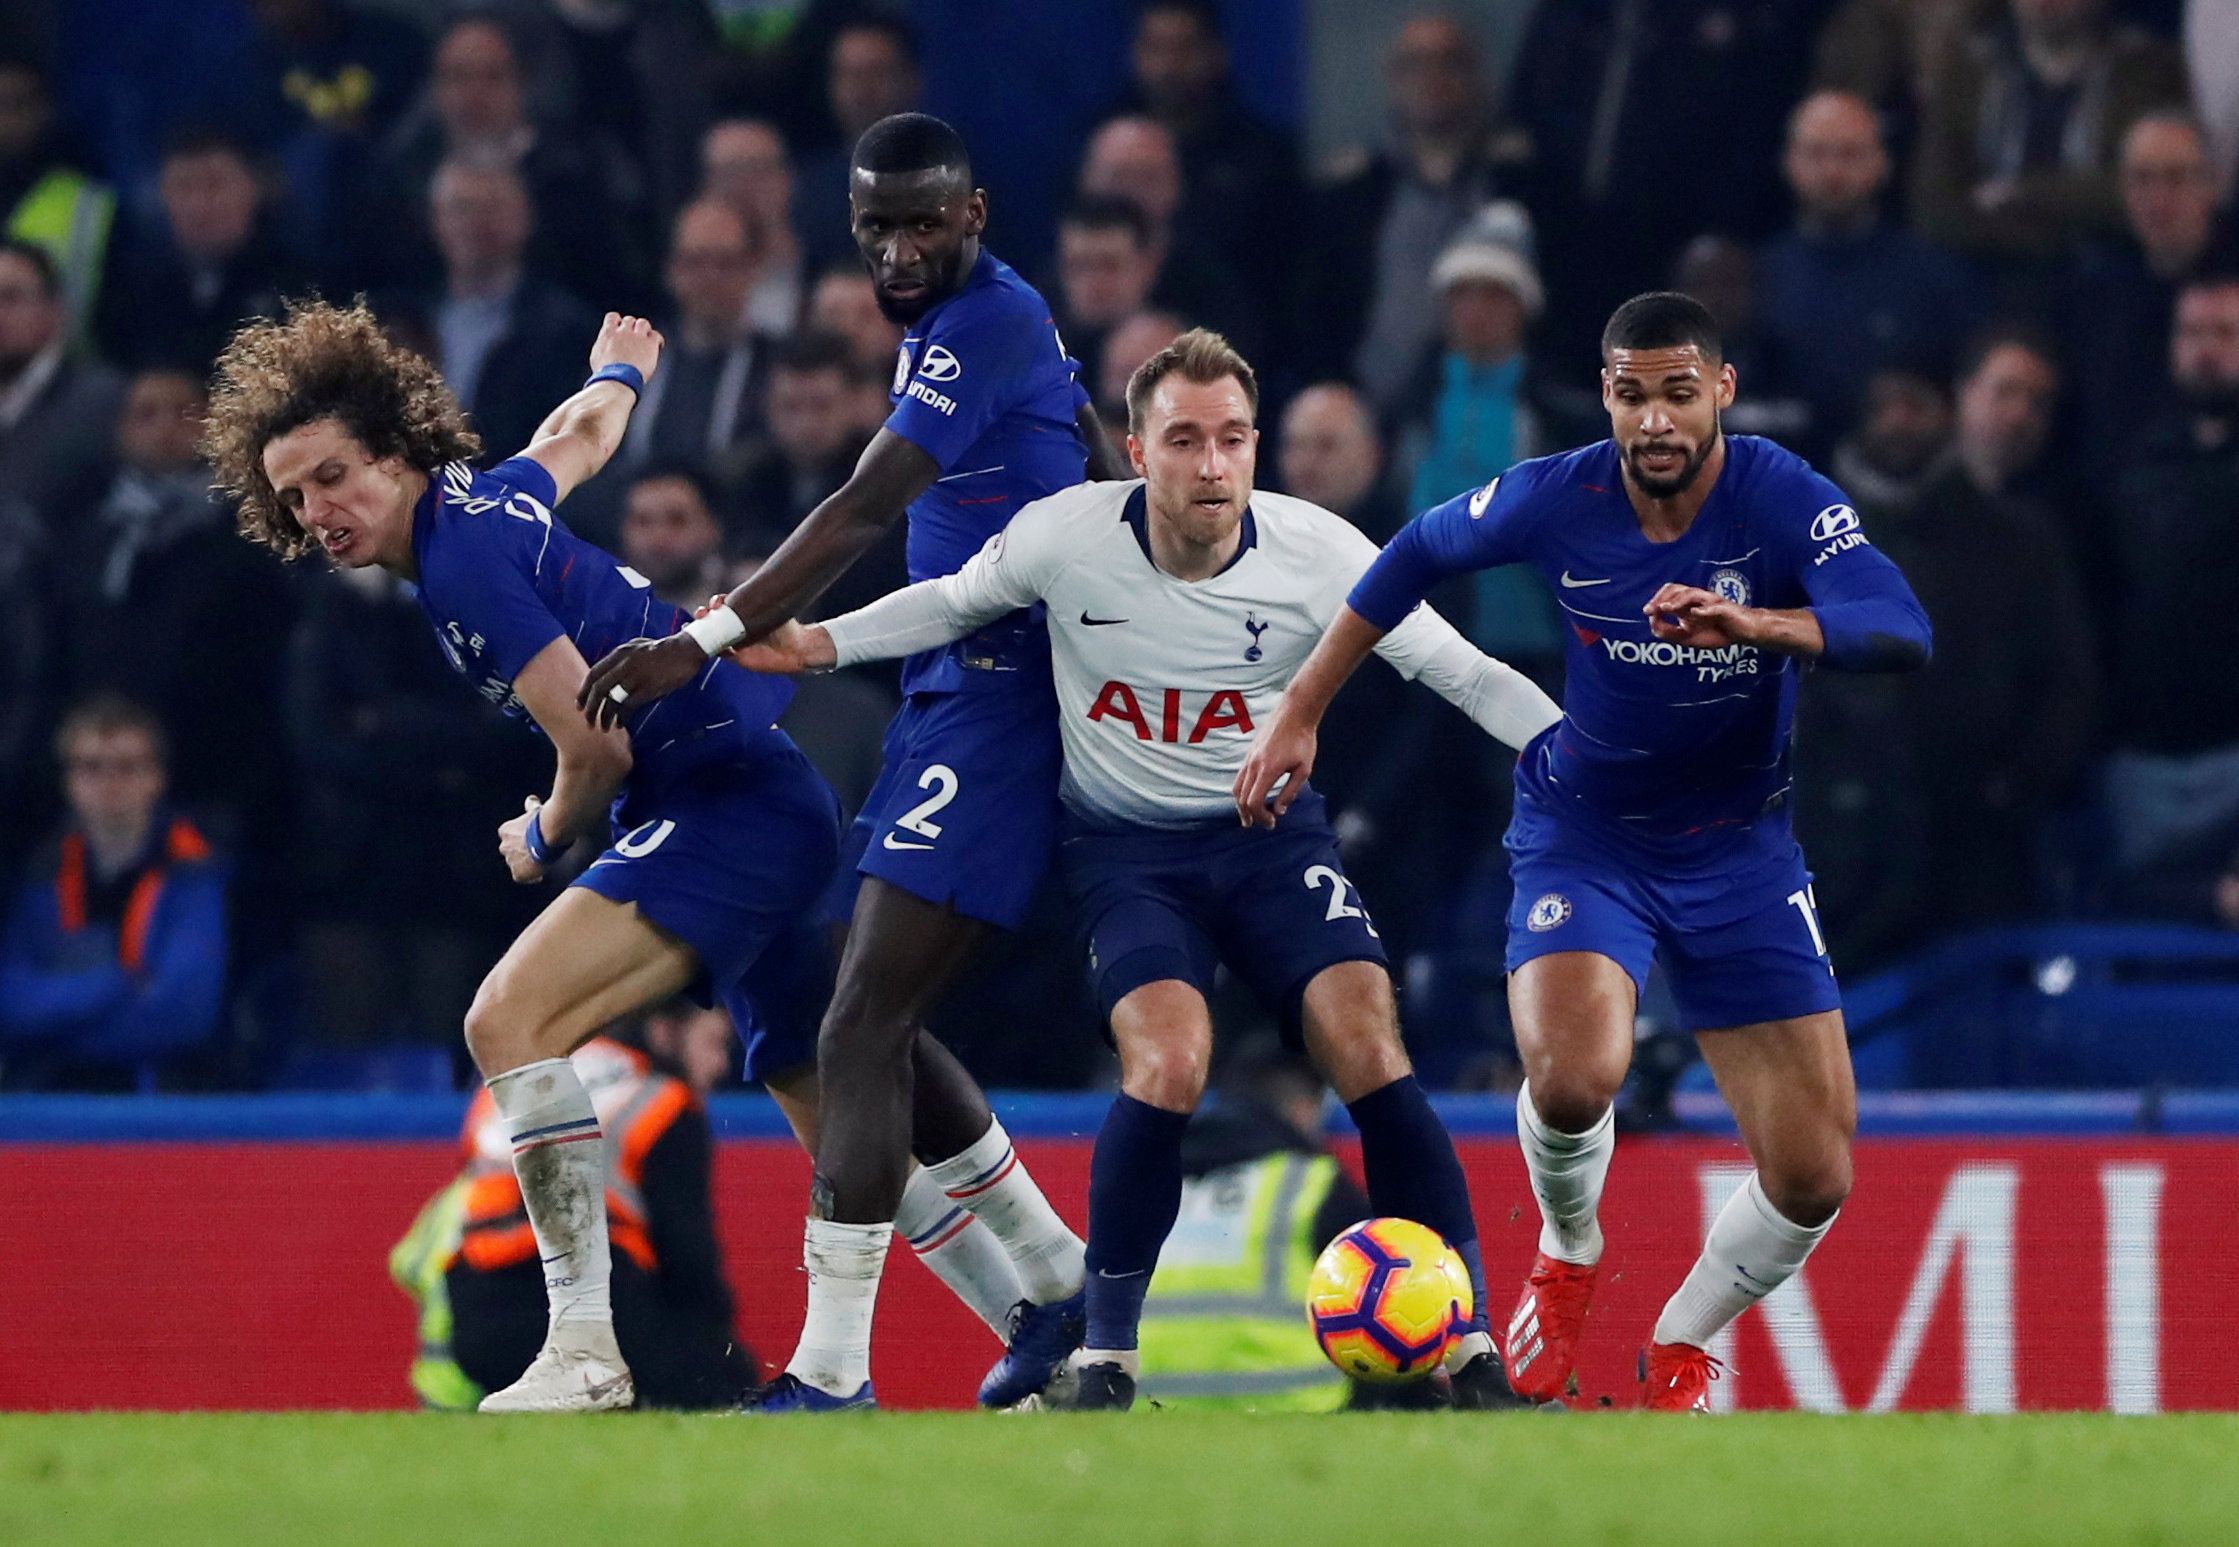 Soccer Football - Premier League - Chelsea v Tottenham Hotspur - Stamford Bridge, London, Britain - February 27, 2019  Tottenham's Christian Eriksen in action with Chelsea's David Luiz, Antonio Rudiger and Ruben Loftus-Cheek   Action Images via Reuters/Paul Childs  EDITORIAL USE ONLY. No use with unauthorized audio, video, data, fixture lists, club/league logos or "live" services. Online in-match use limited to 75 images, no video emulation. No use in betting, games or single club/league/player 